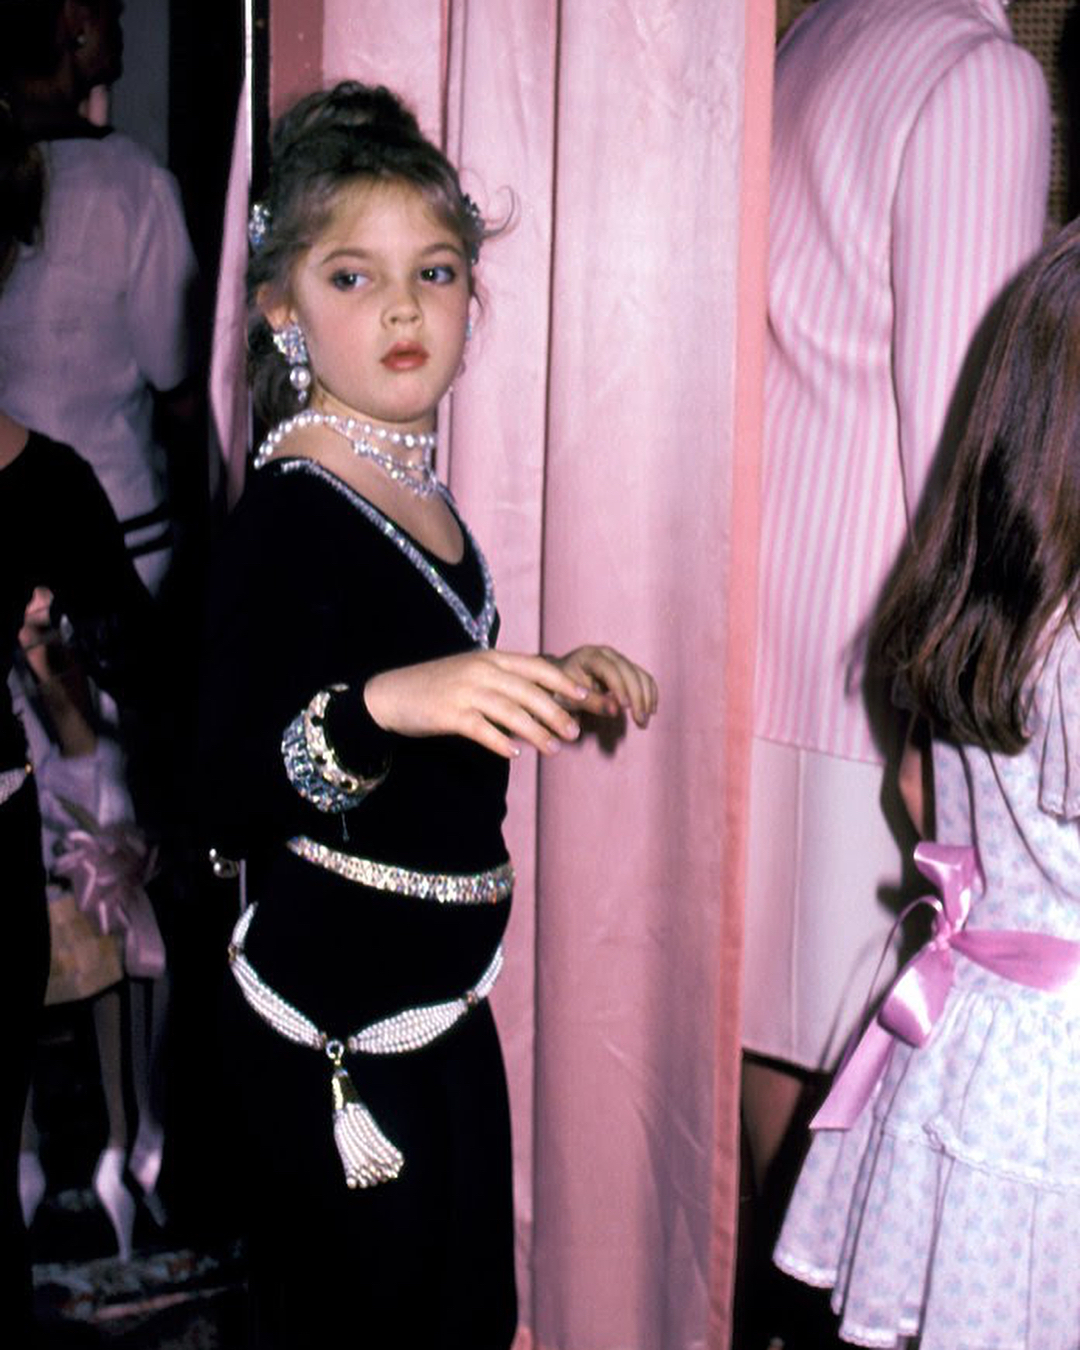 Drew Barrymore at a fashion show in 1983.